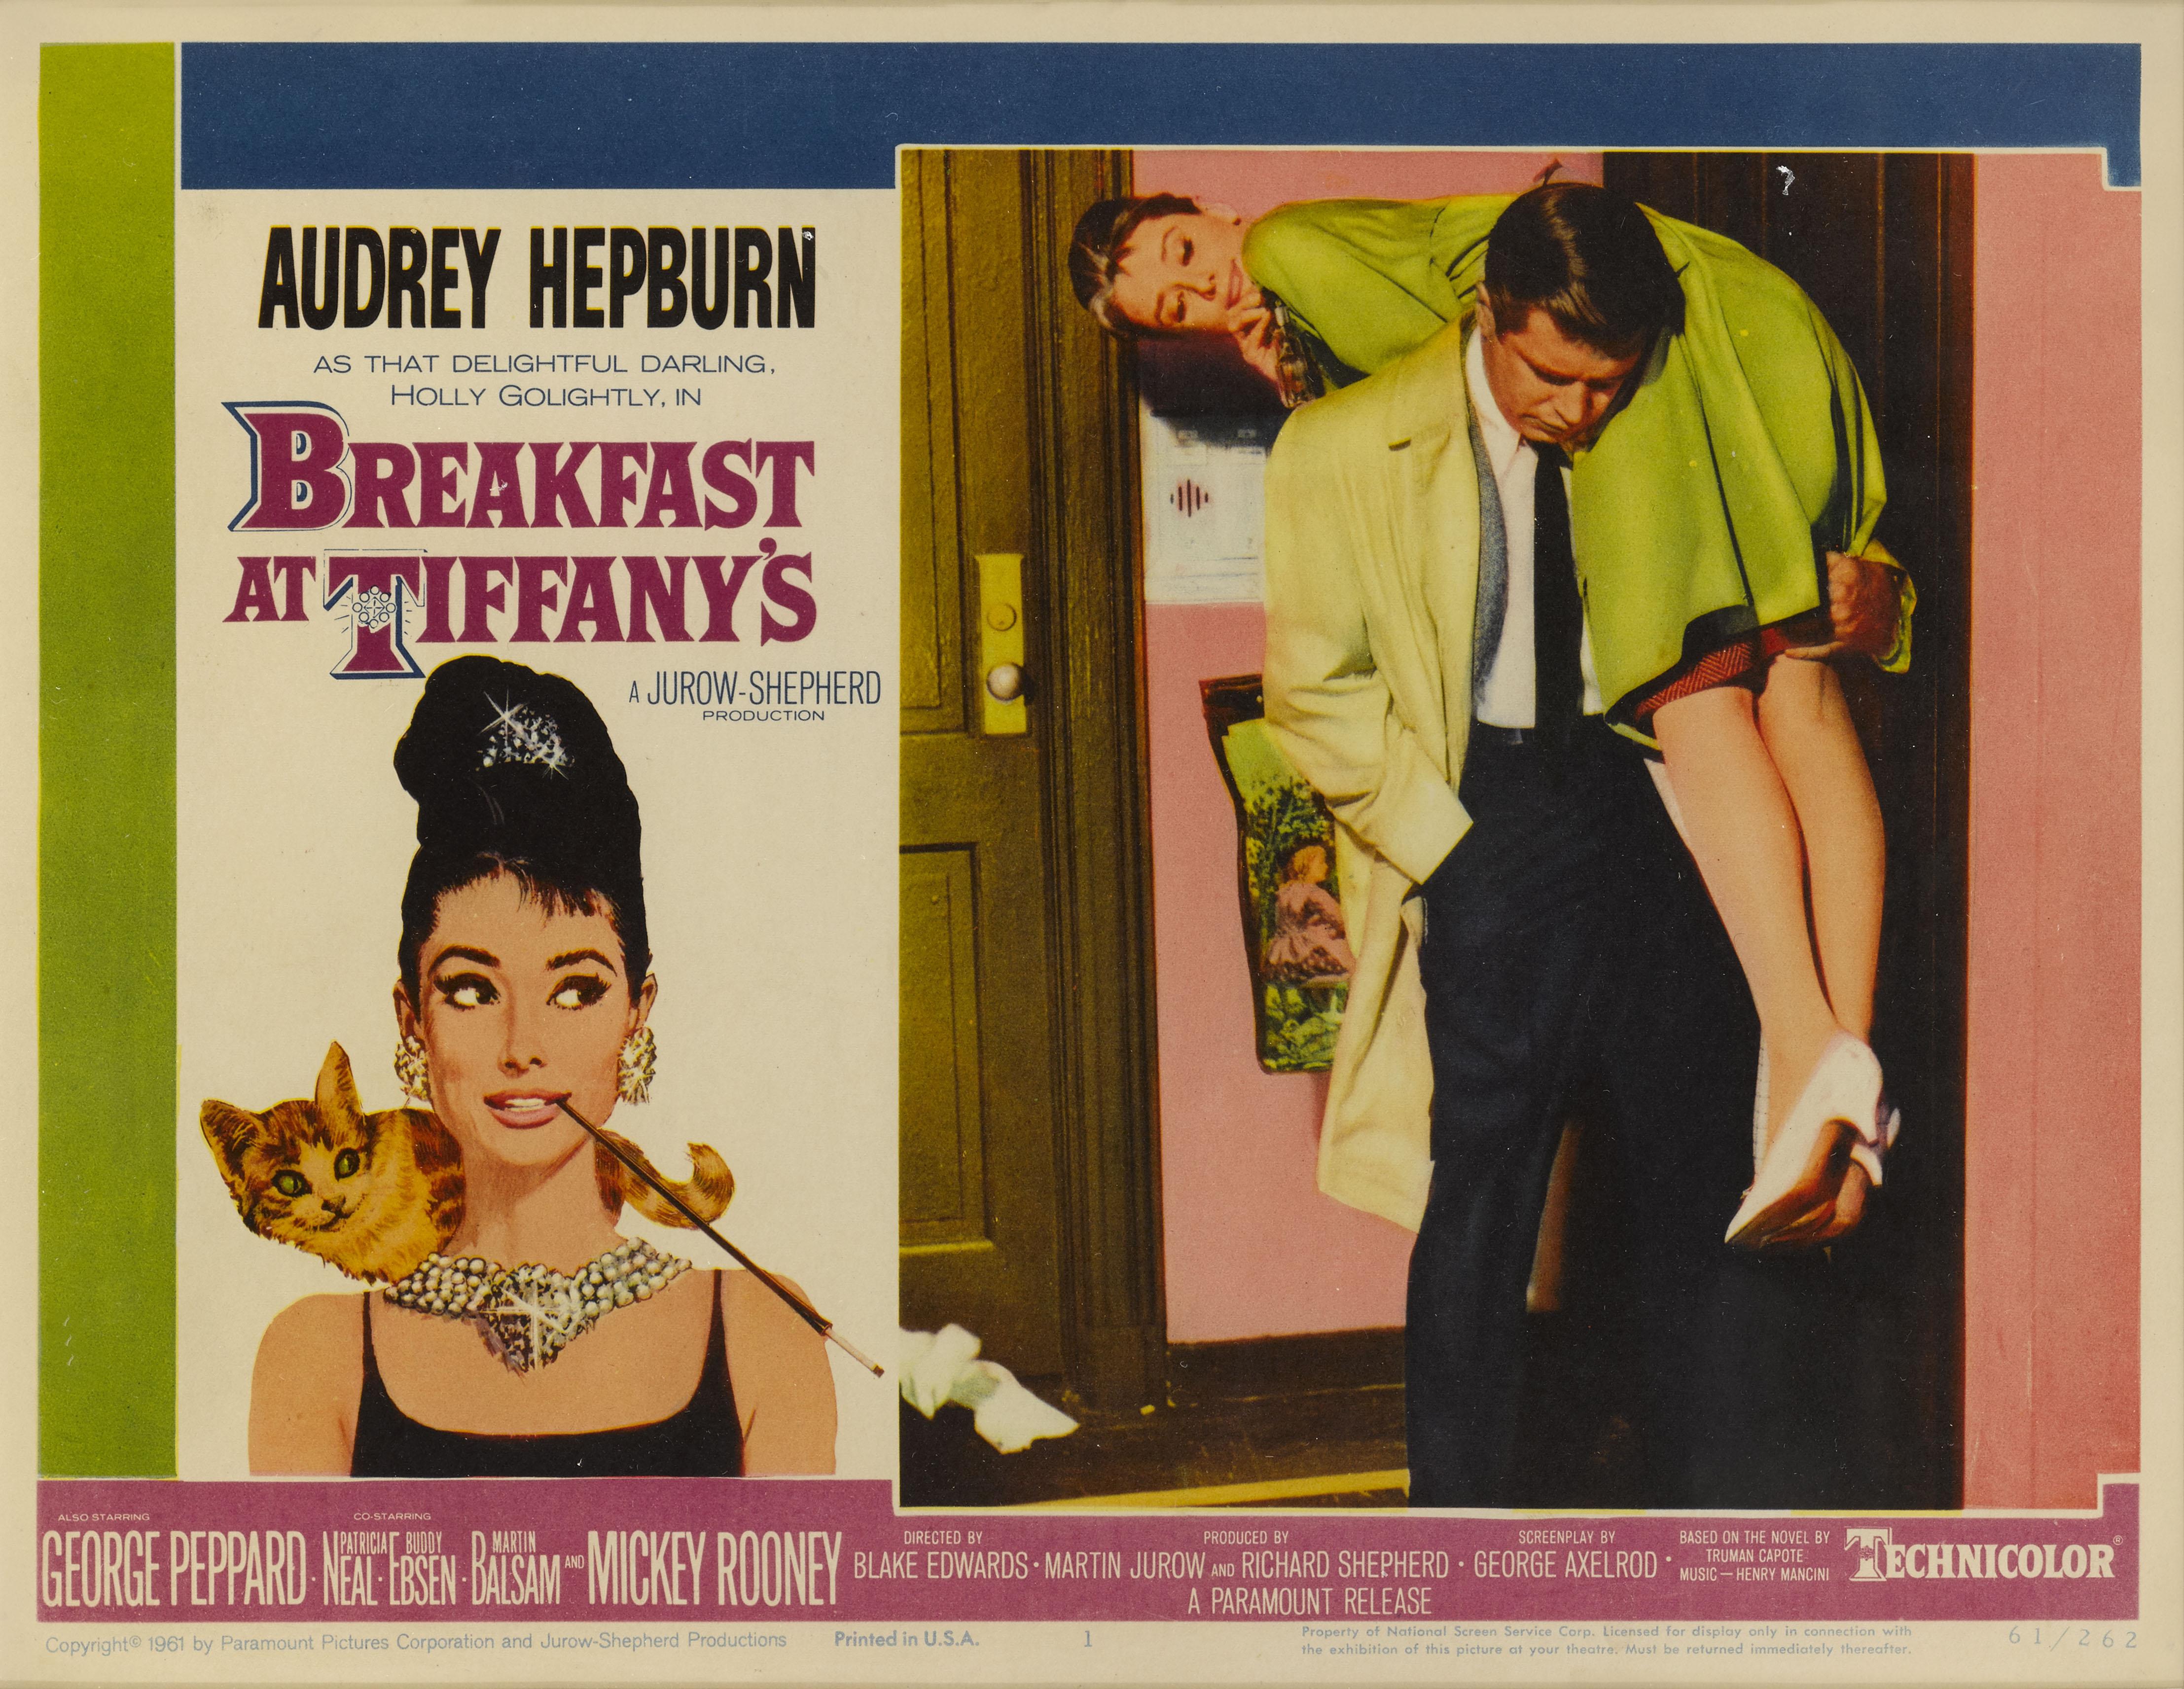 Original US Lobby card number 1 designed for the legendary 1961 Audrey Hepburn Comedy, Romance.
This film was directed by Blake Edwards, and stars Audrey Hepburn and George Peppard. This is undoubtedly Hepburn's most famous and iconic role.
This